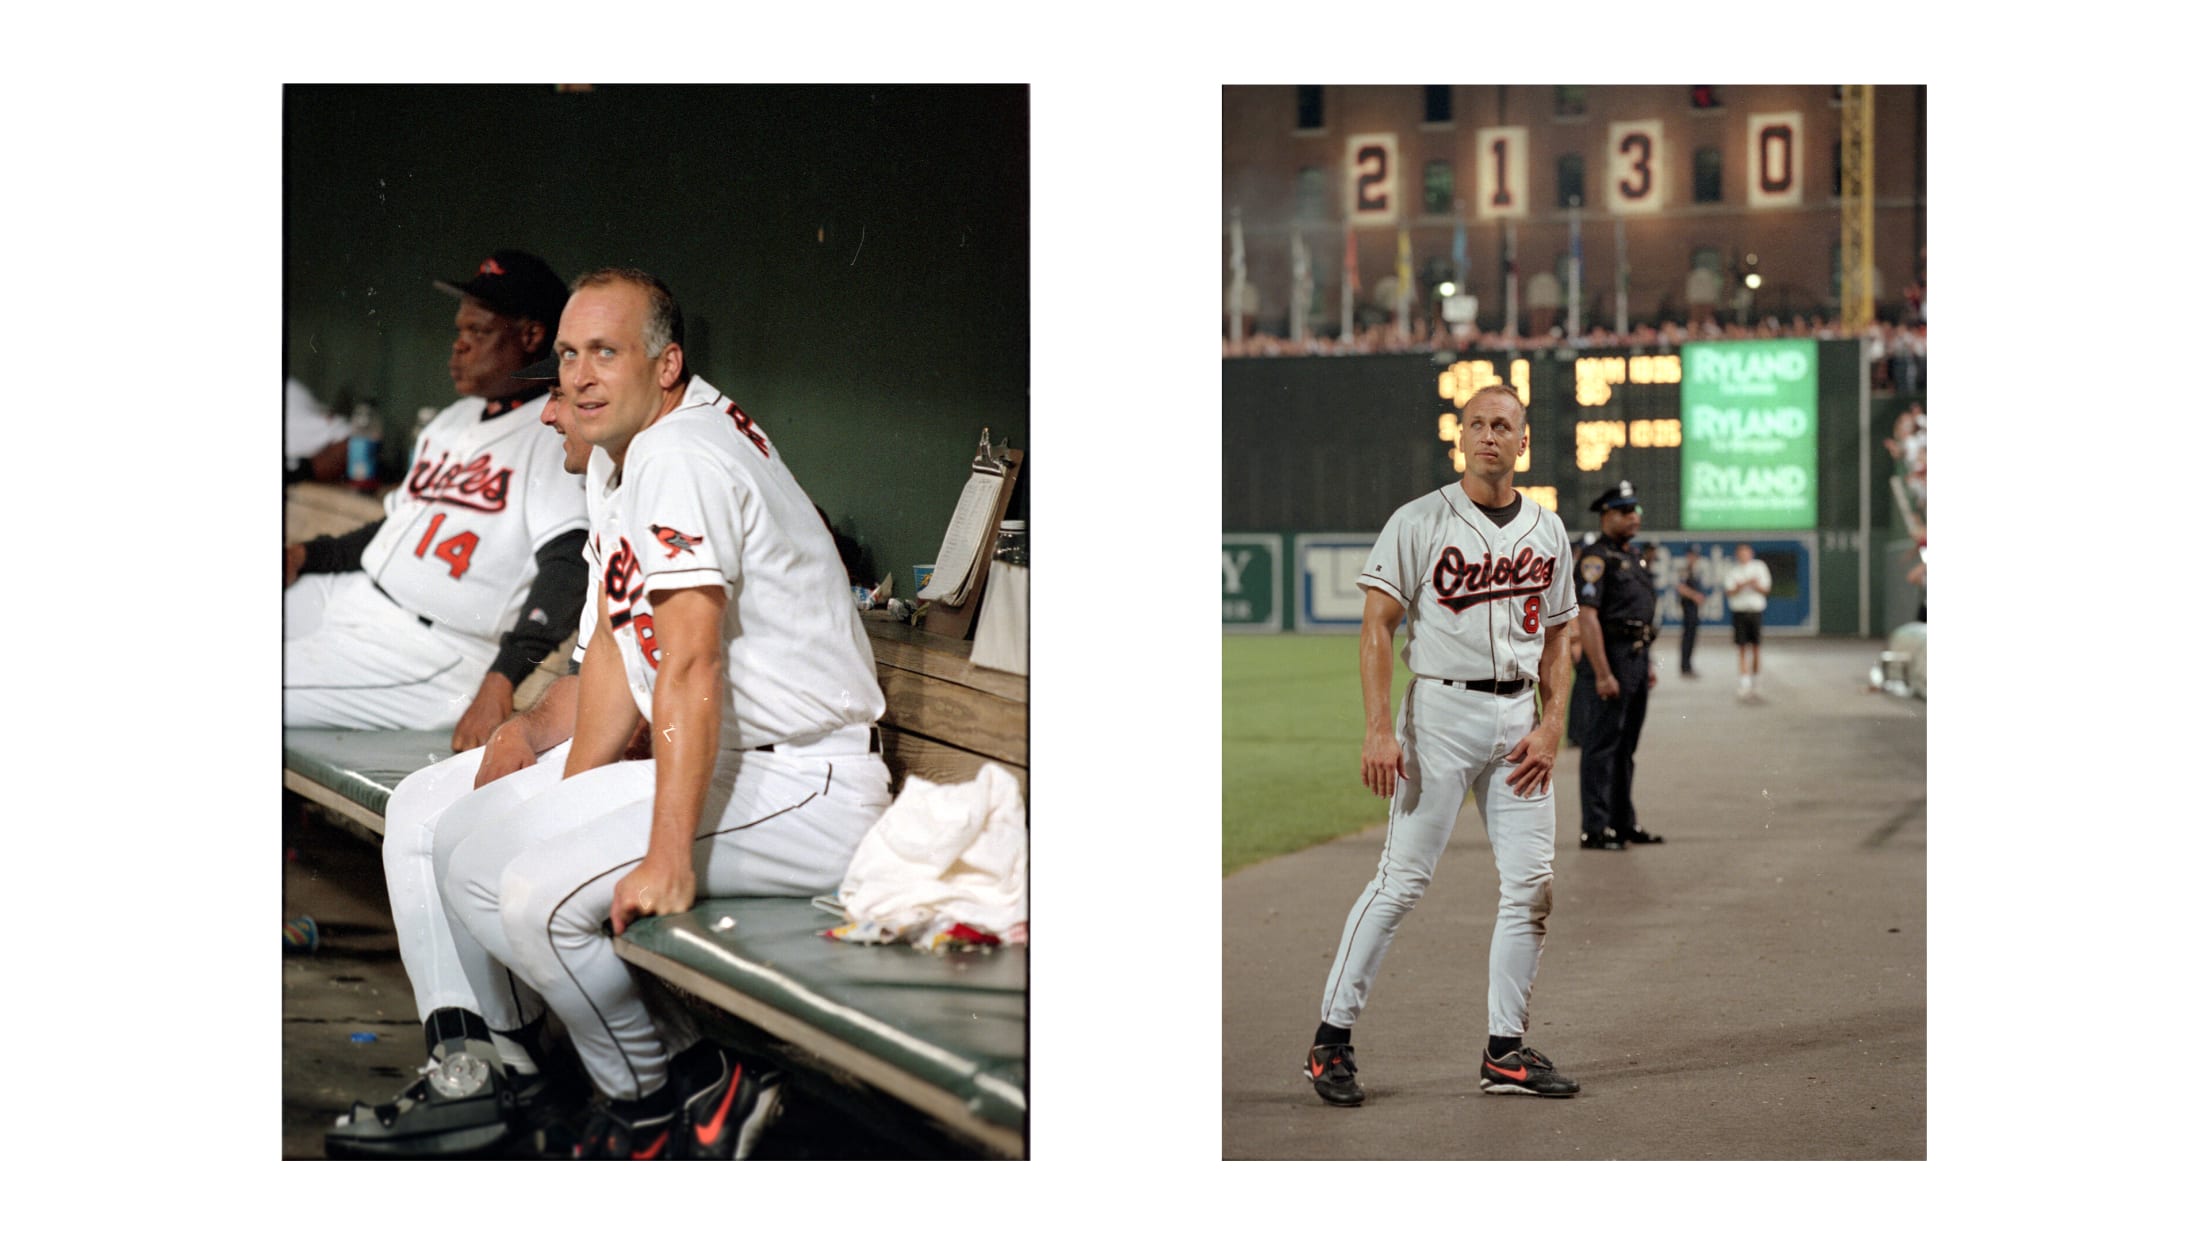 SportsCenter - 25 years ago, Cal Ripken Jr. played in his 2,131st  consecutive game, breaking Lou Gehrig's MLB record. Iron Man.